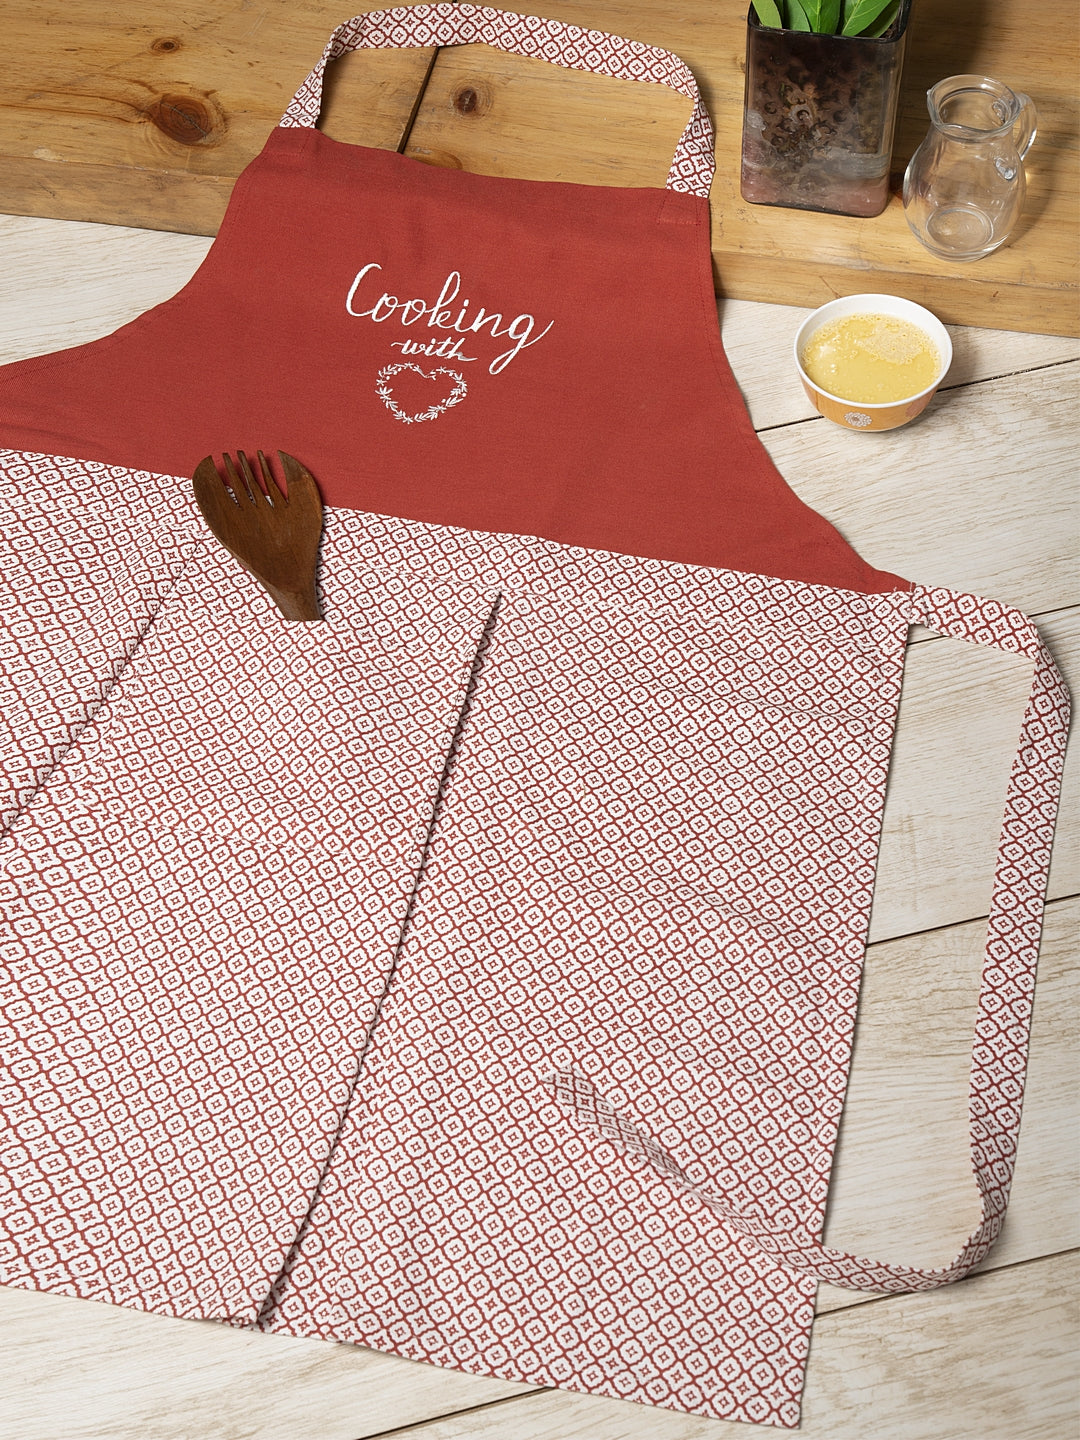 Cooking With Love Embroidered Apron